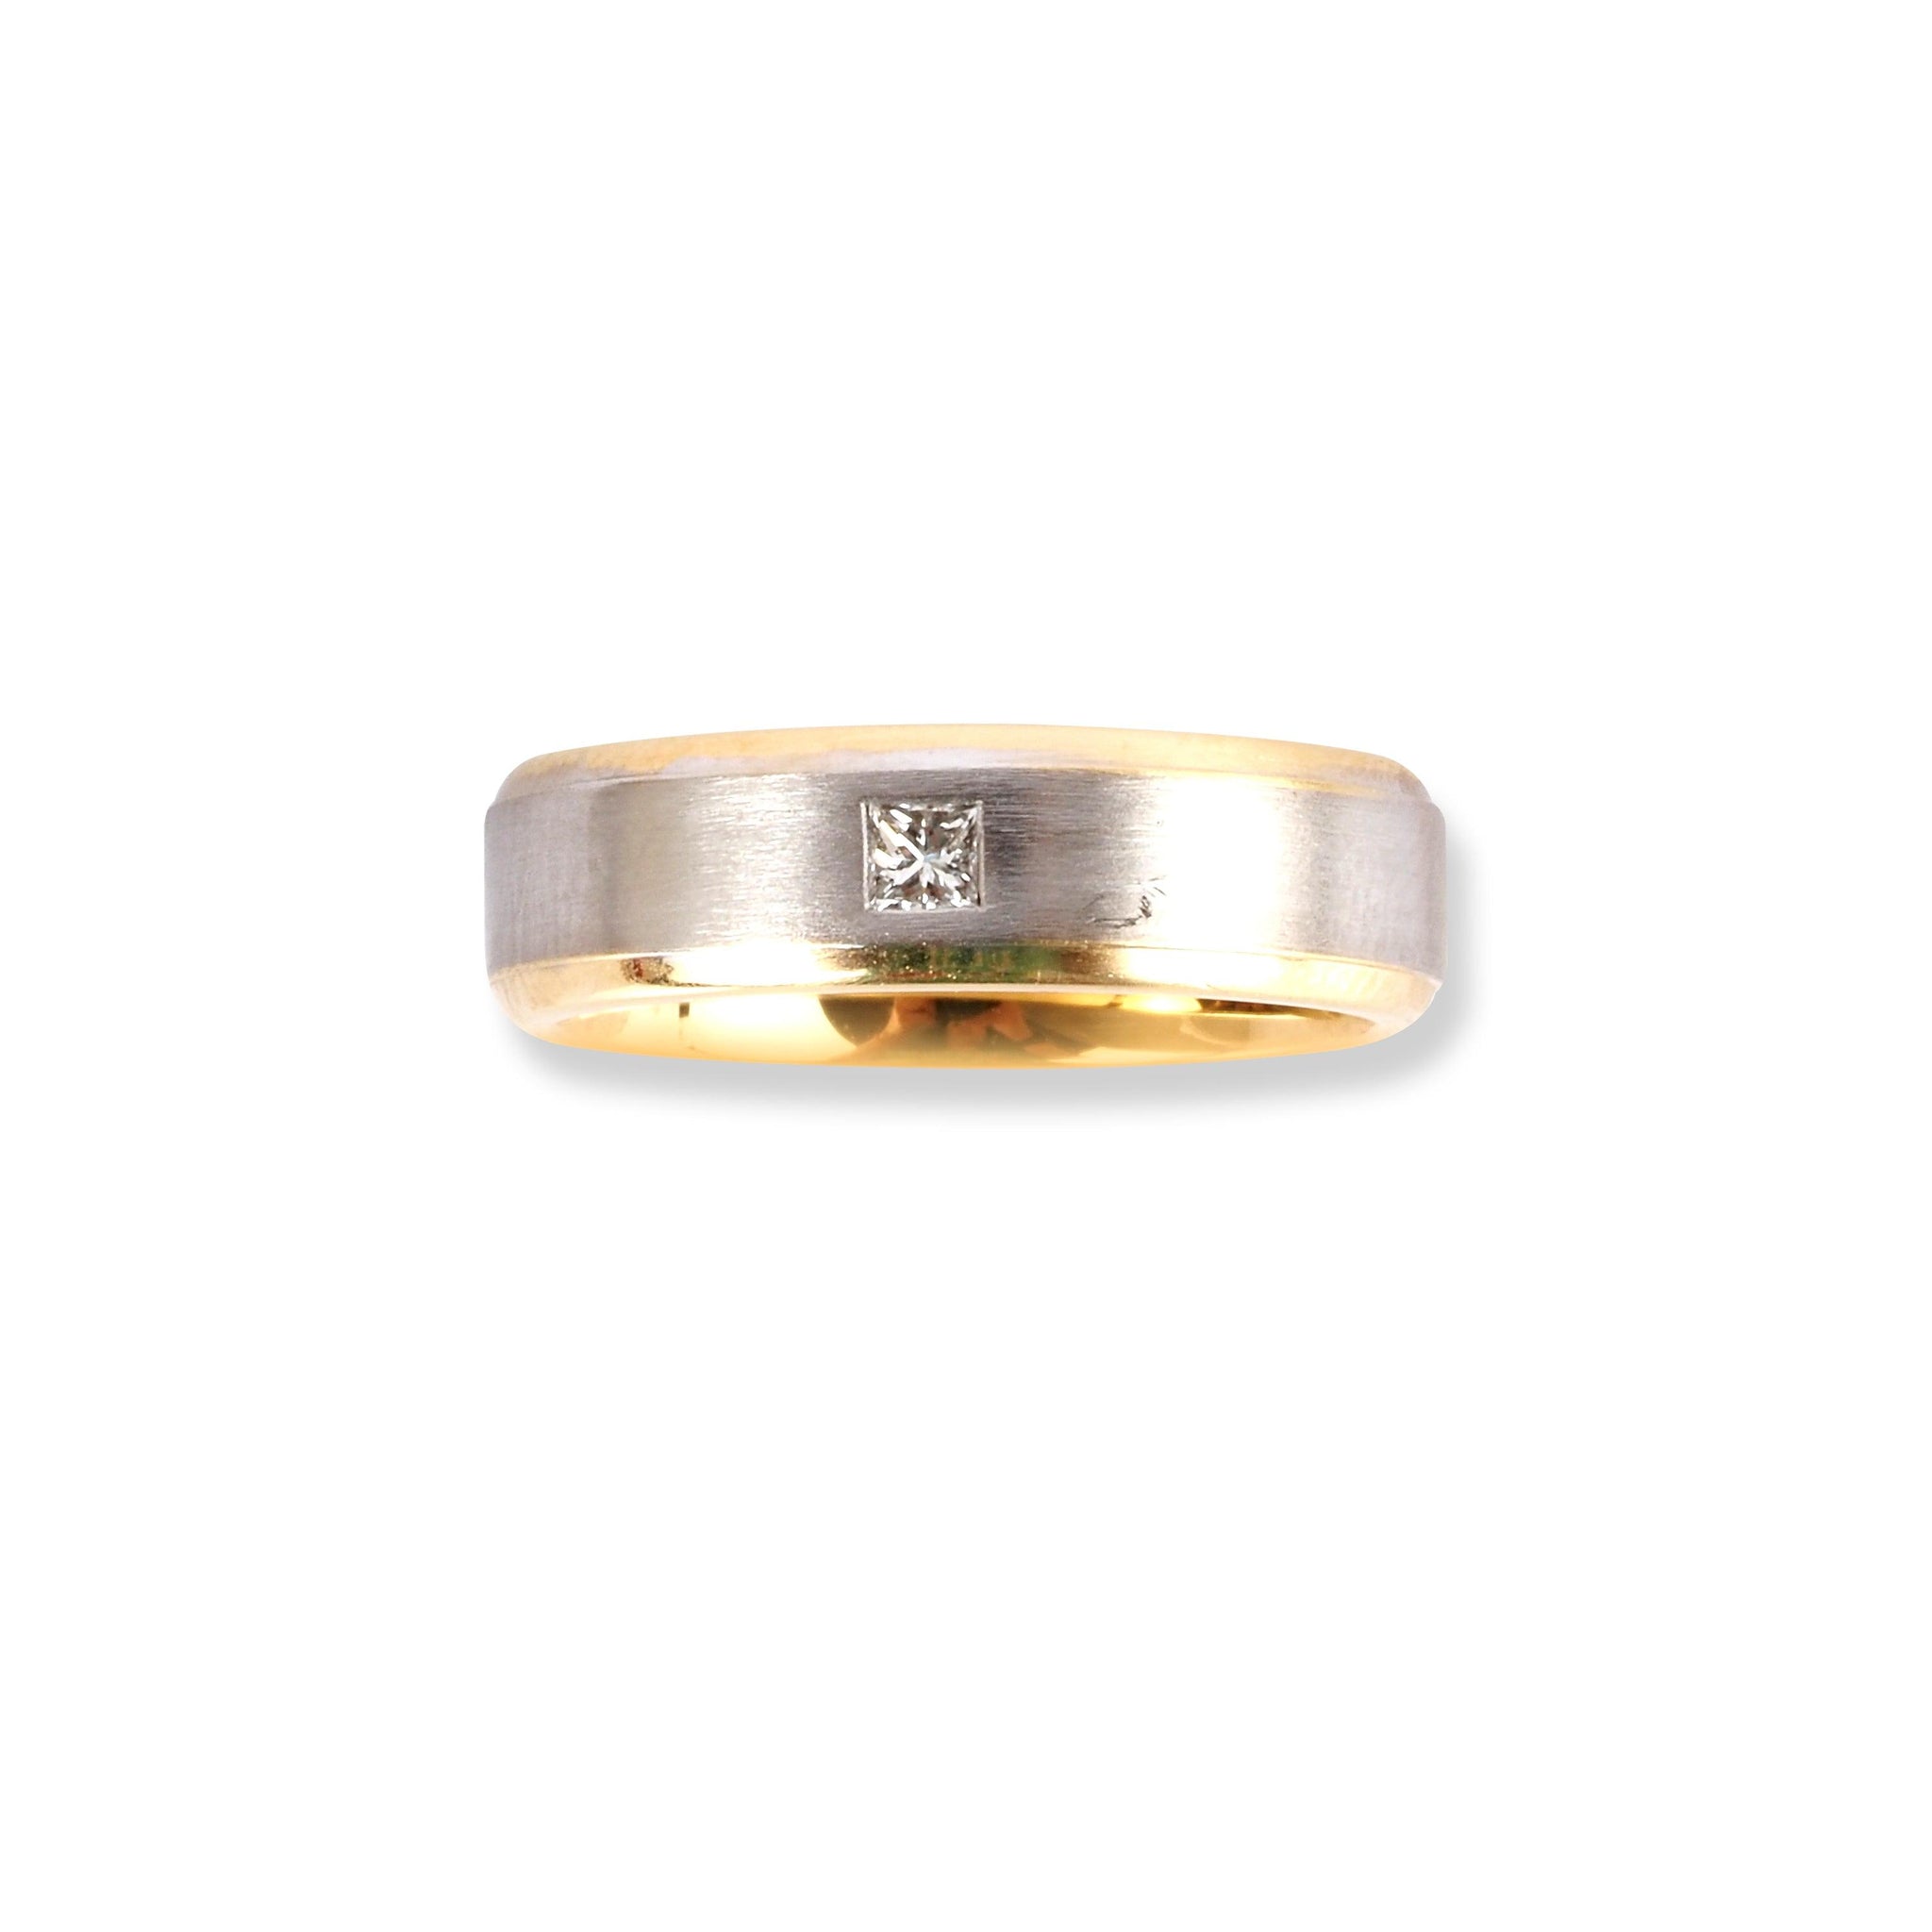 18ct White & Yellow Gold Wedding Band With Satin Finish & Polished Grooved Edges LR-6657